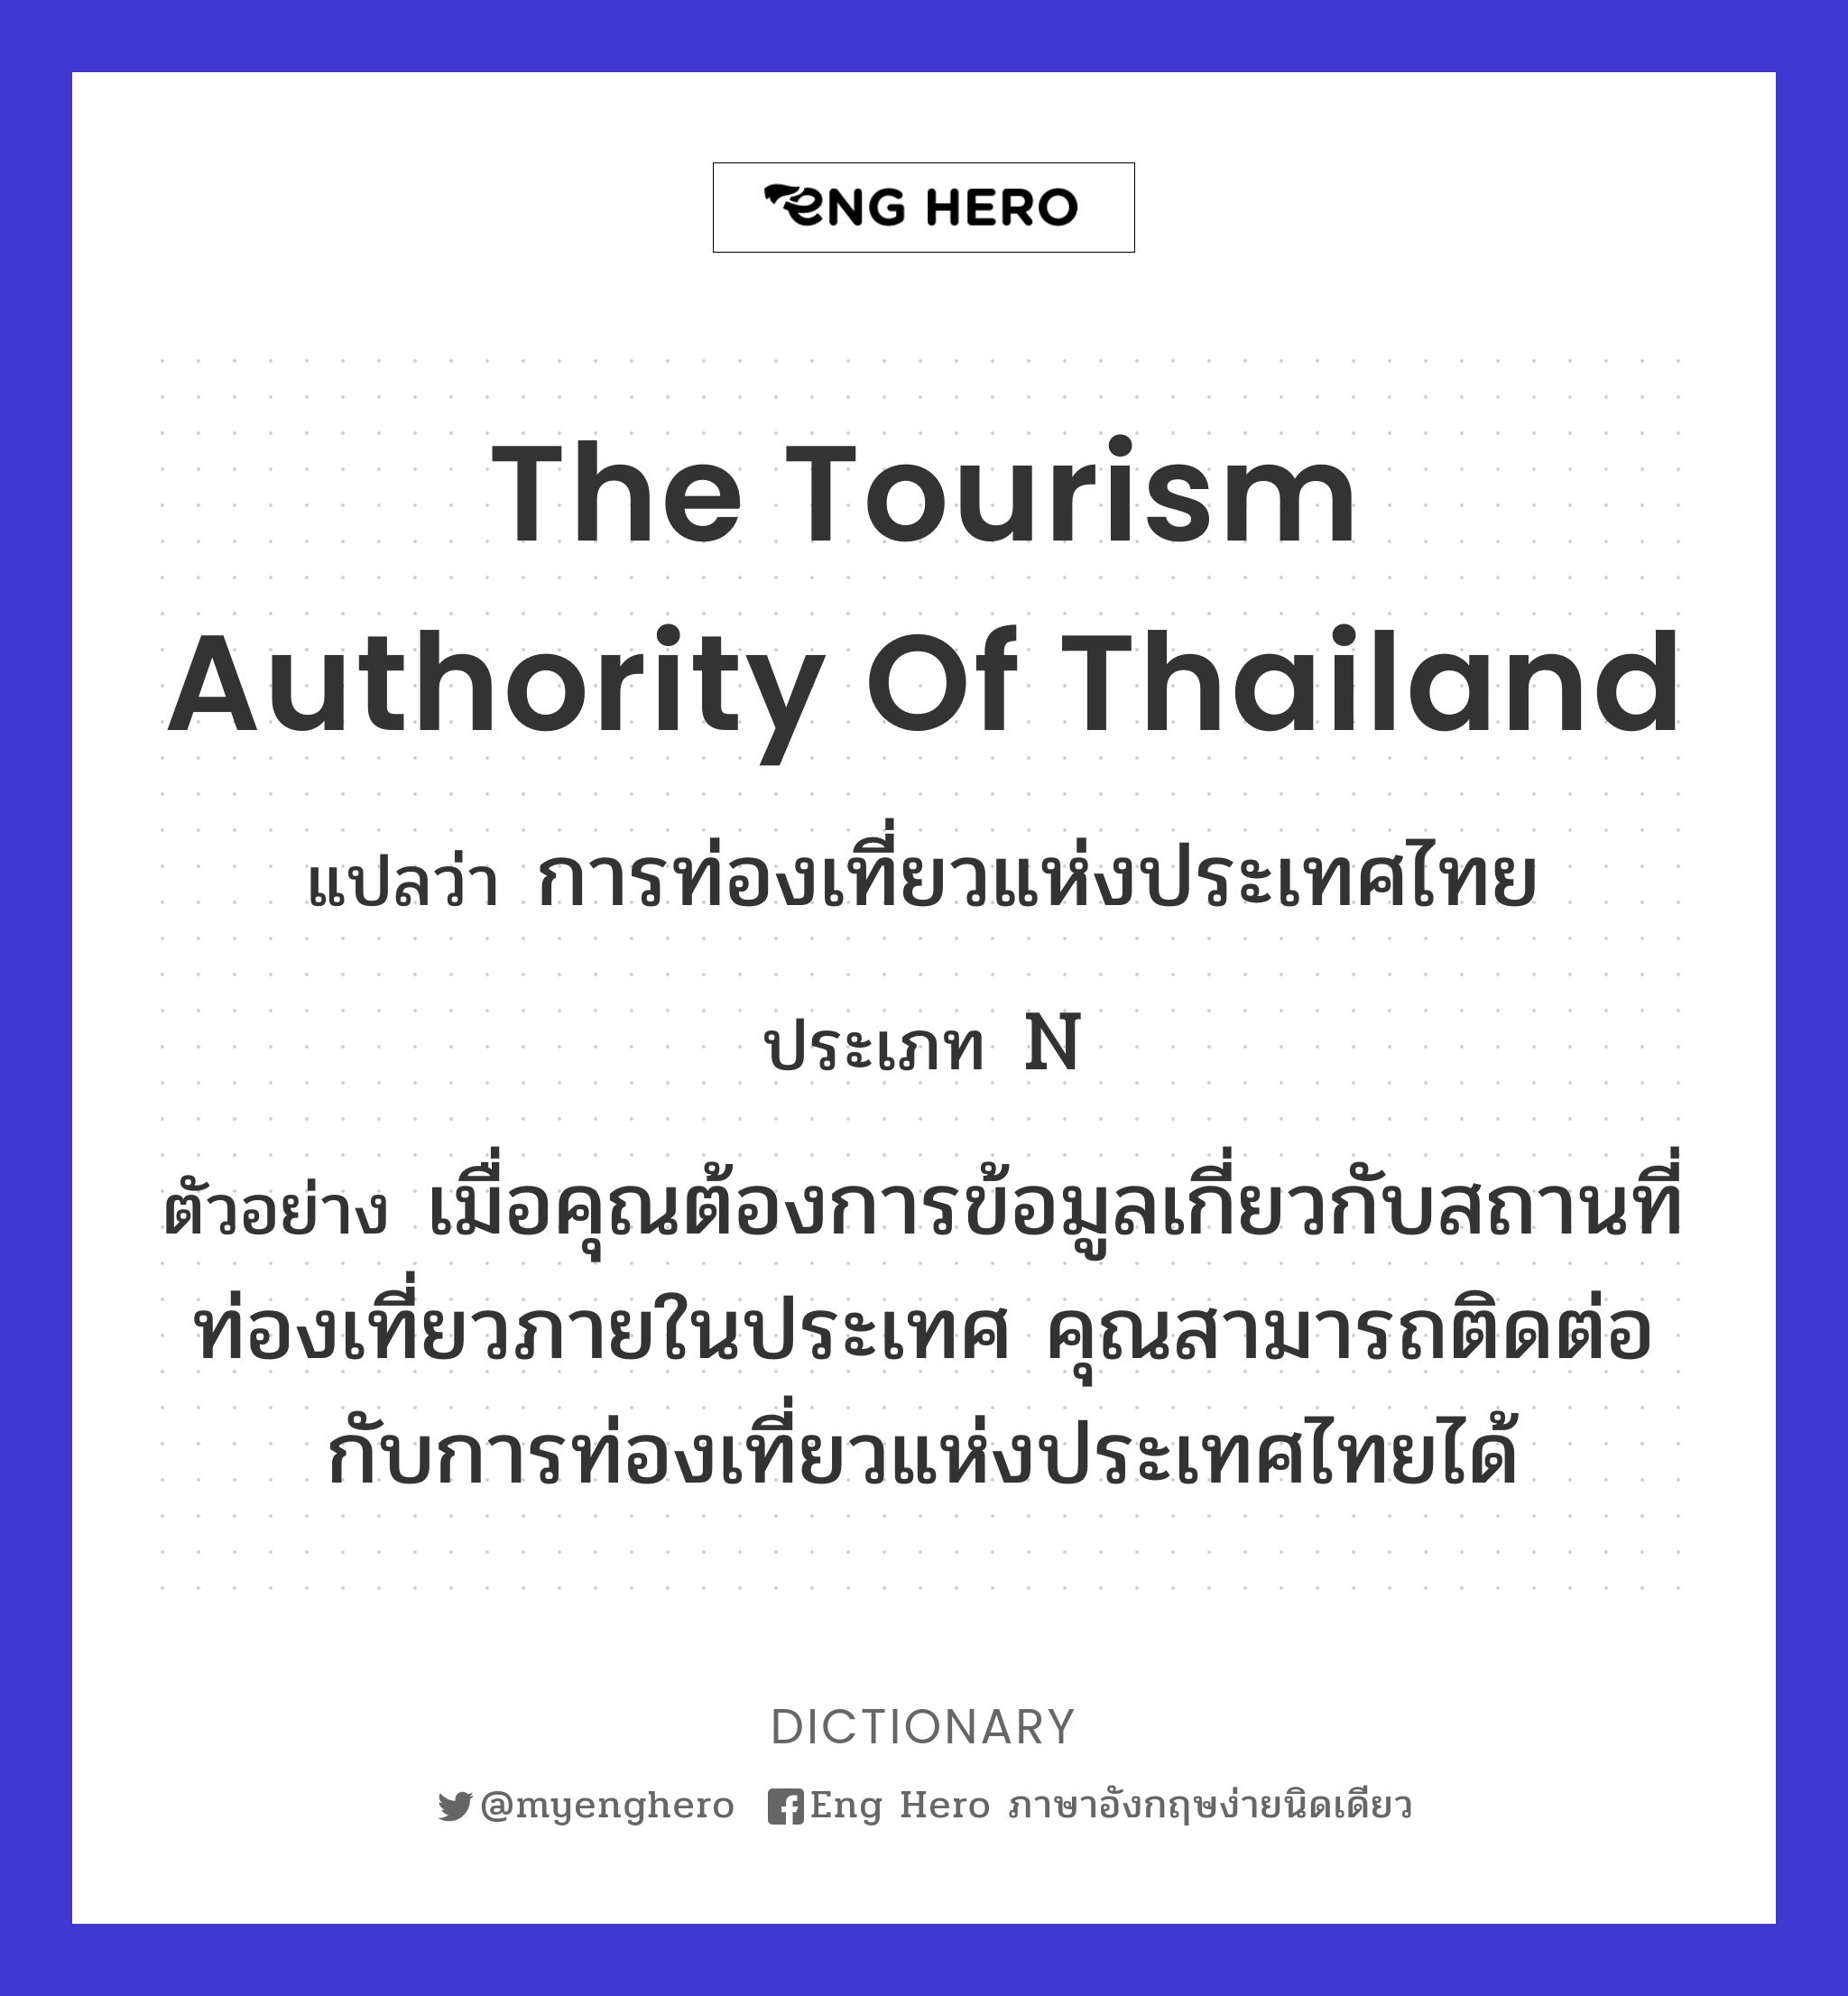 The Tourism Authority of Thailand